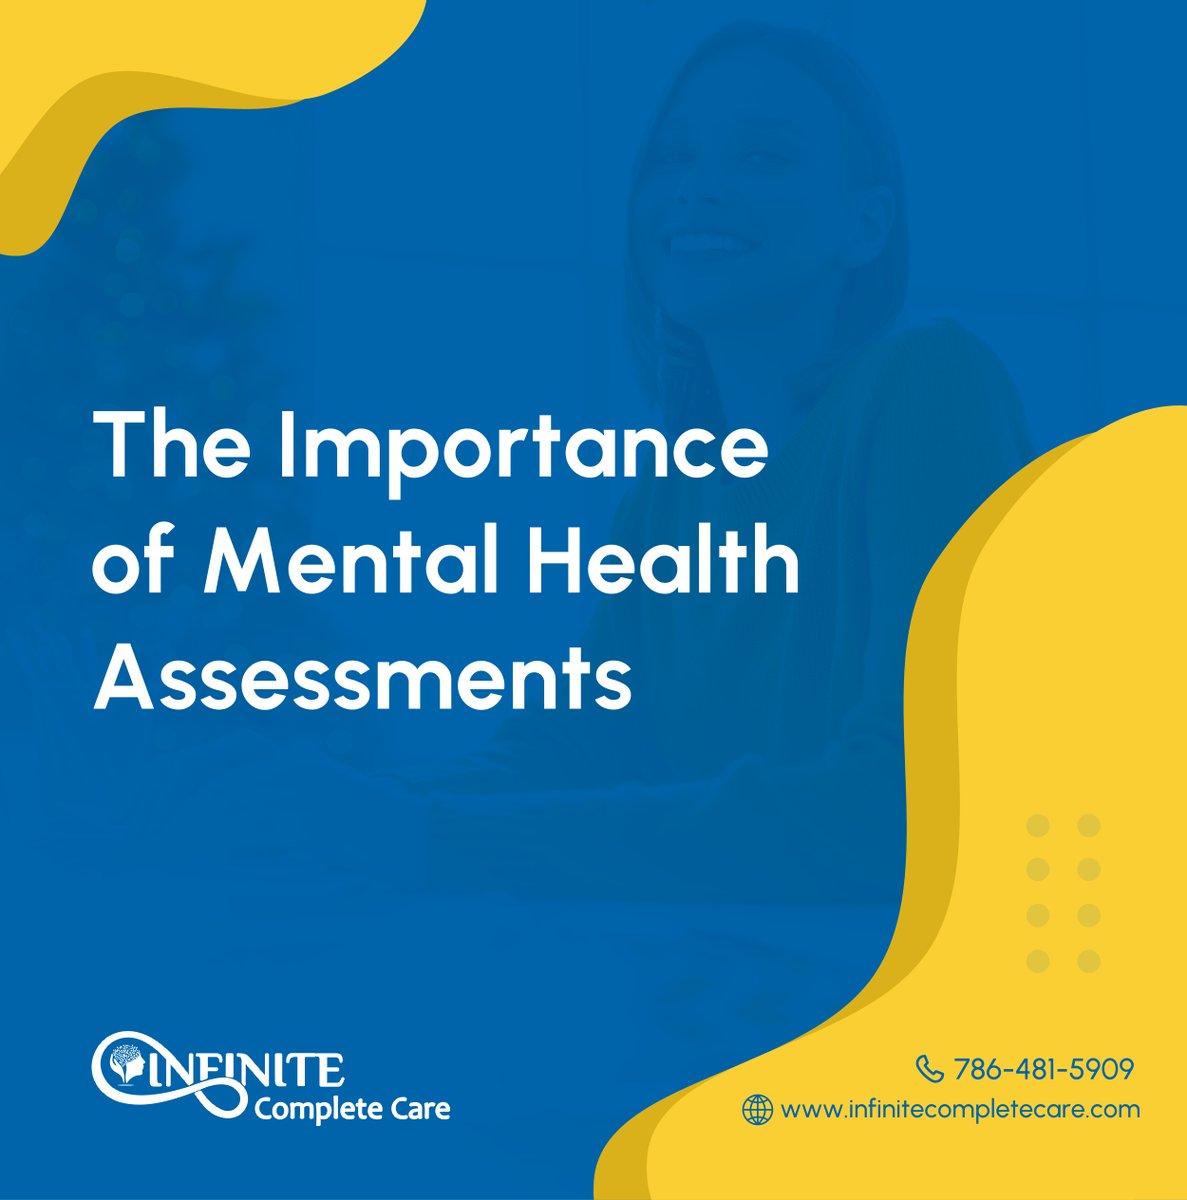 Regular mental health assessments are essential for maintaining overall well-being. Schedule an assessment today to gain clarity on your mental health needs and receive personalized support. Contact us for more information: tinyurl.com/2u6a6bzt. 

#MentalHealthAssessment